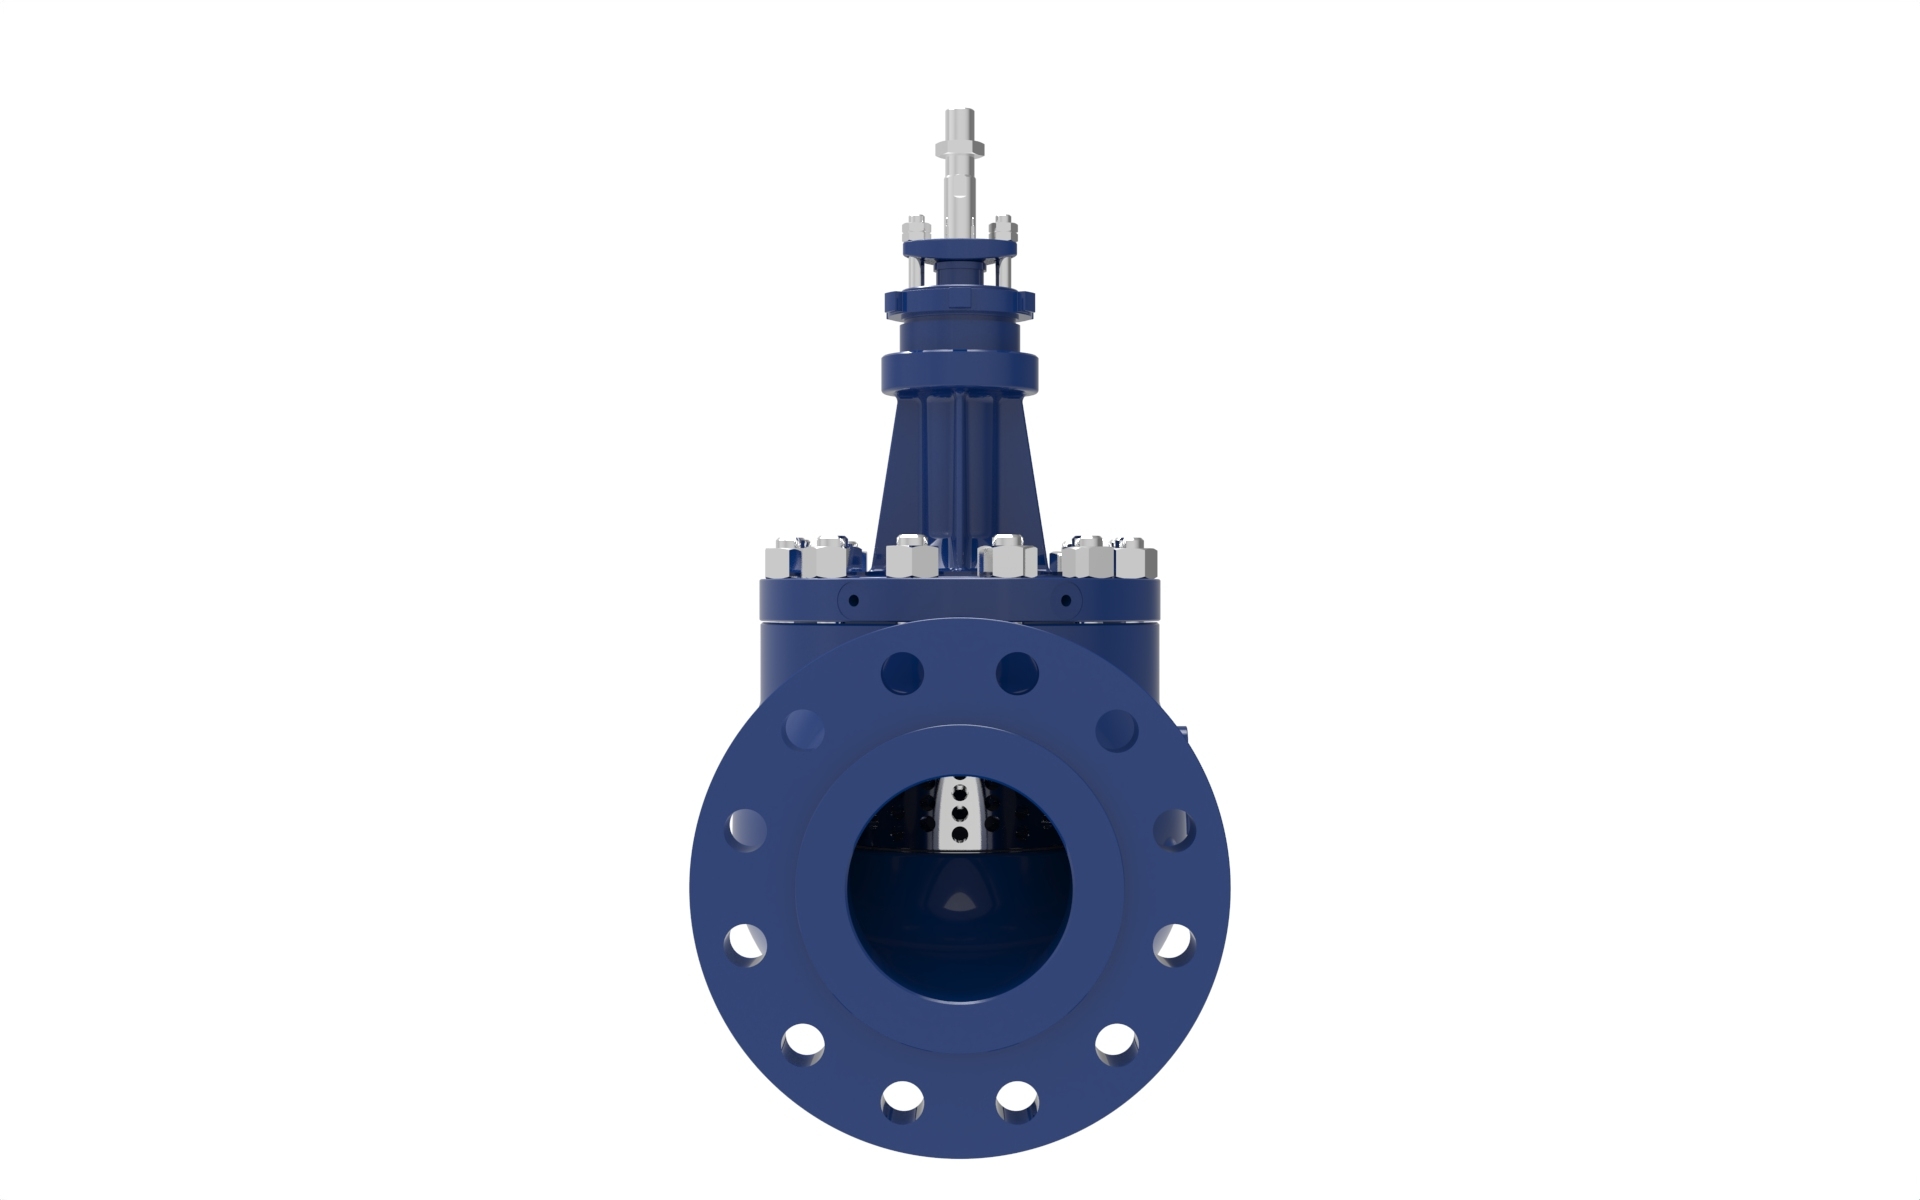 Front view of a Blakeborough BV500 Cage Trim Valve manufactured by Trillium Flow Technologies